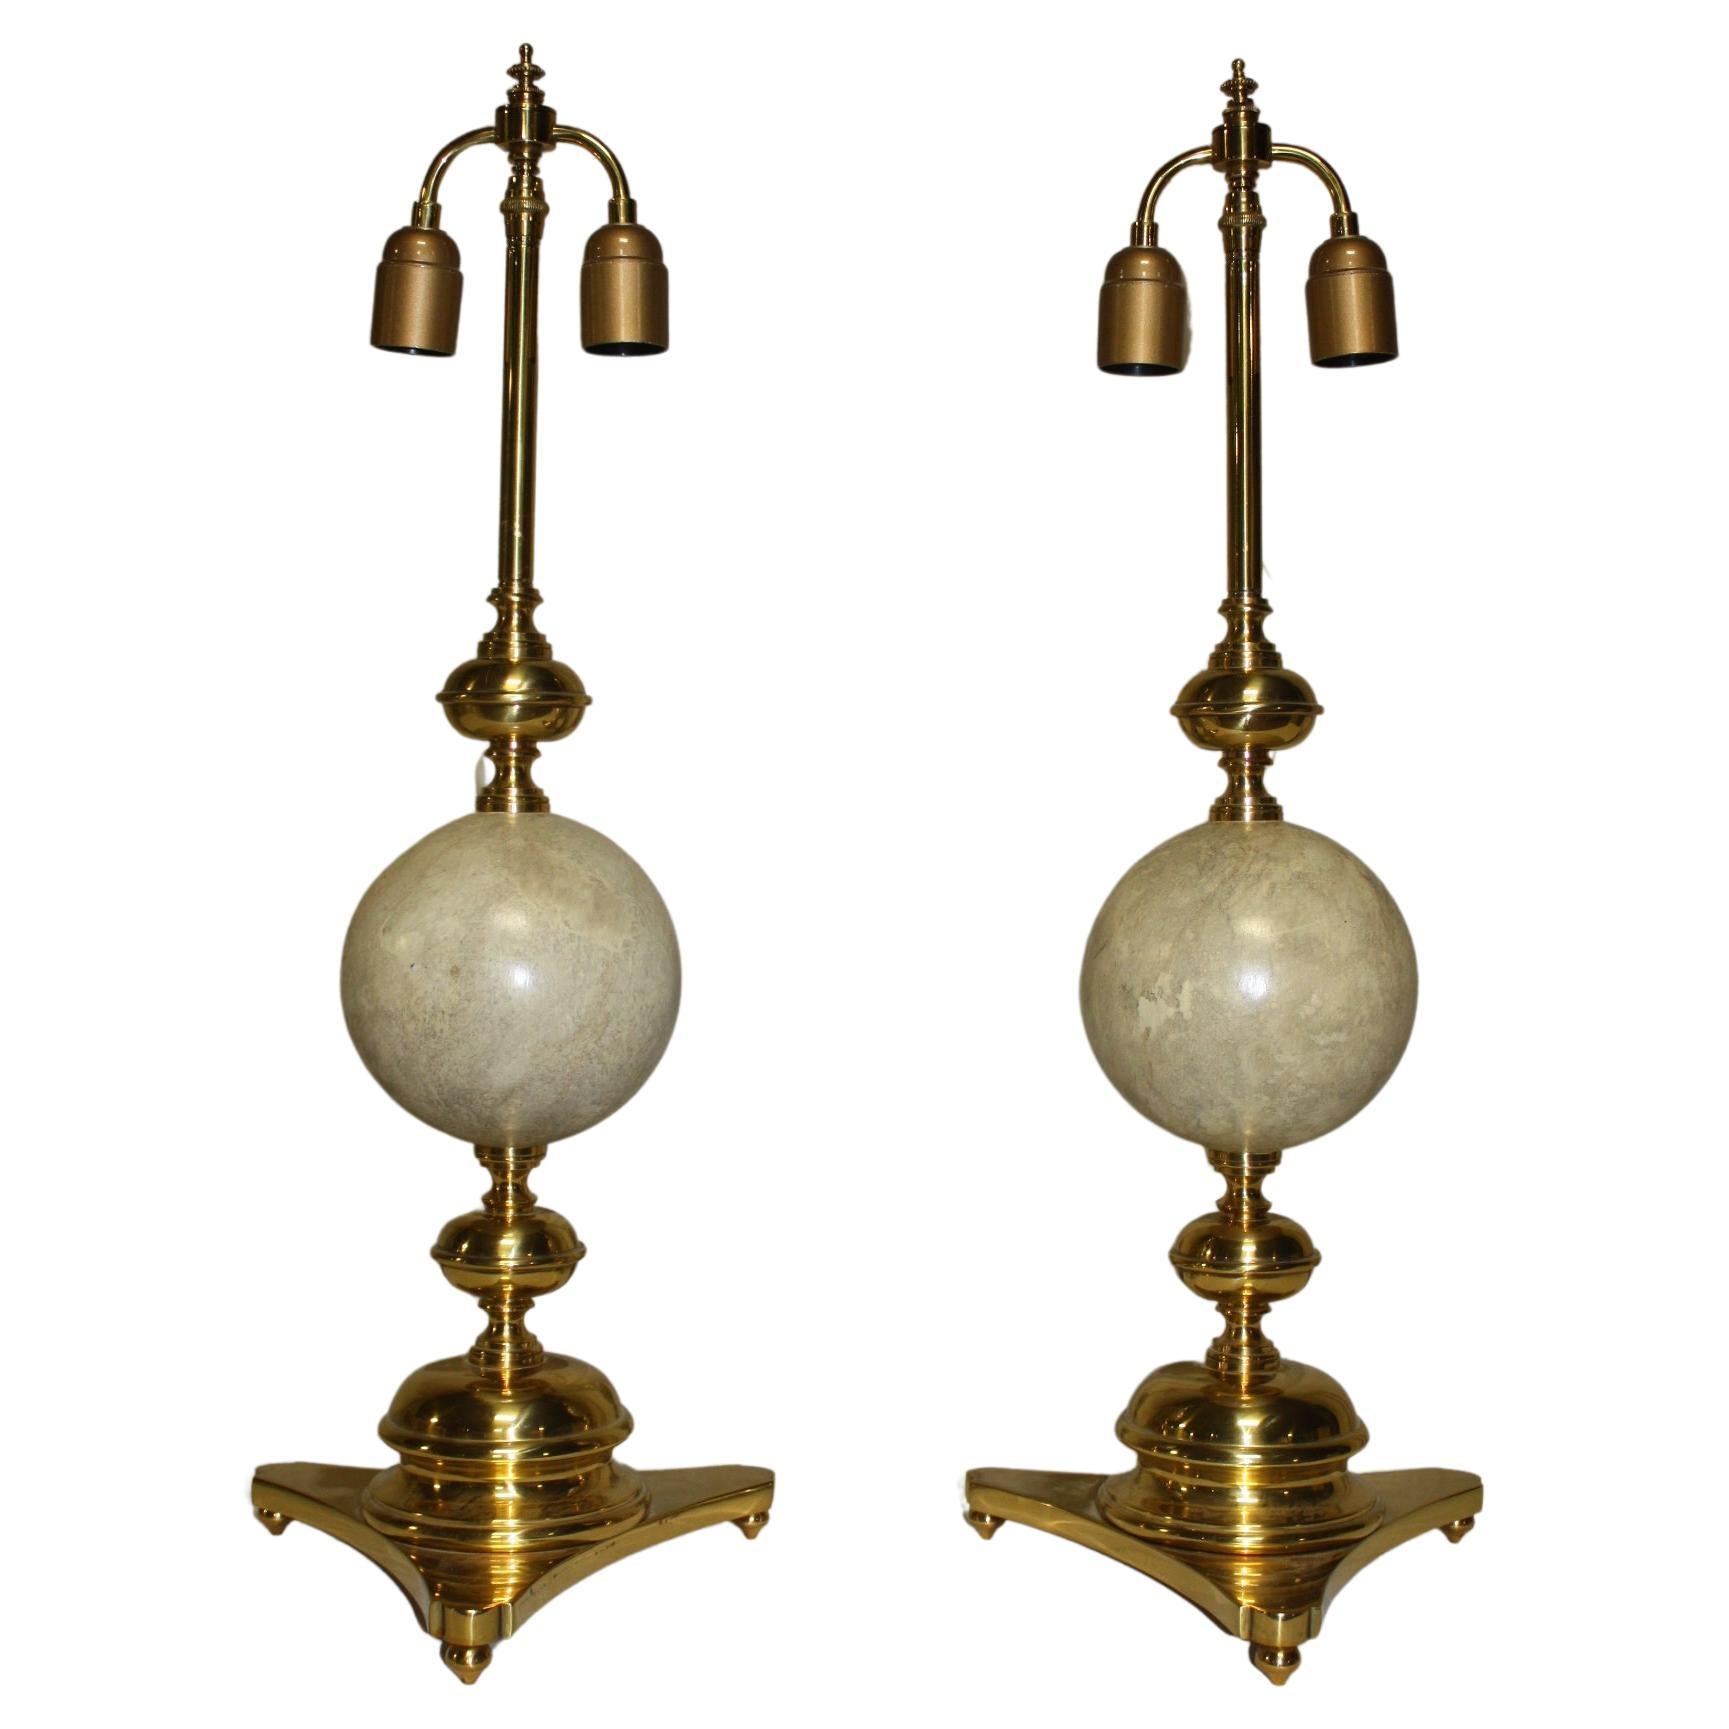 Beautiful work, elegant and refine. Those lamps come from a Parisian home.